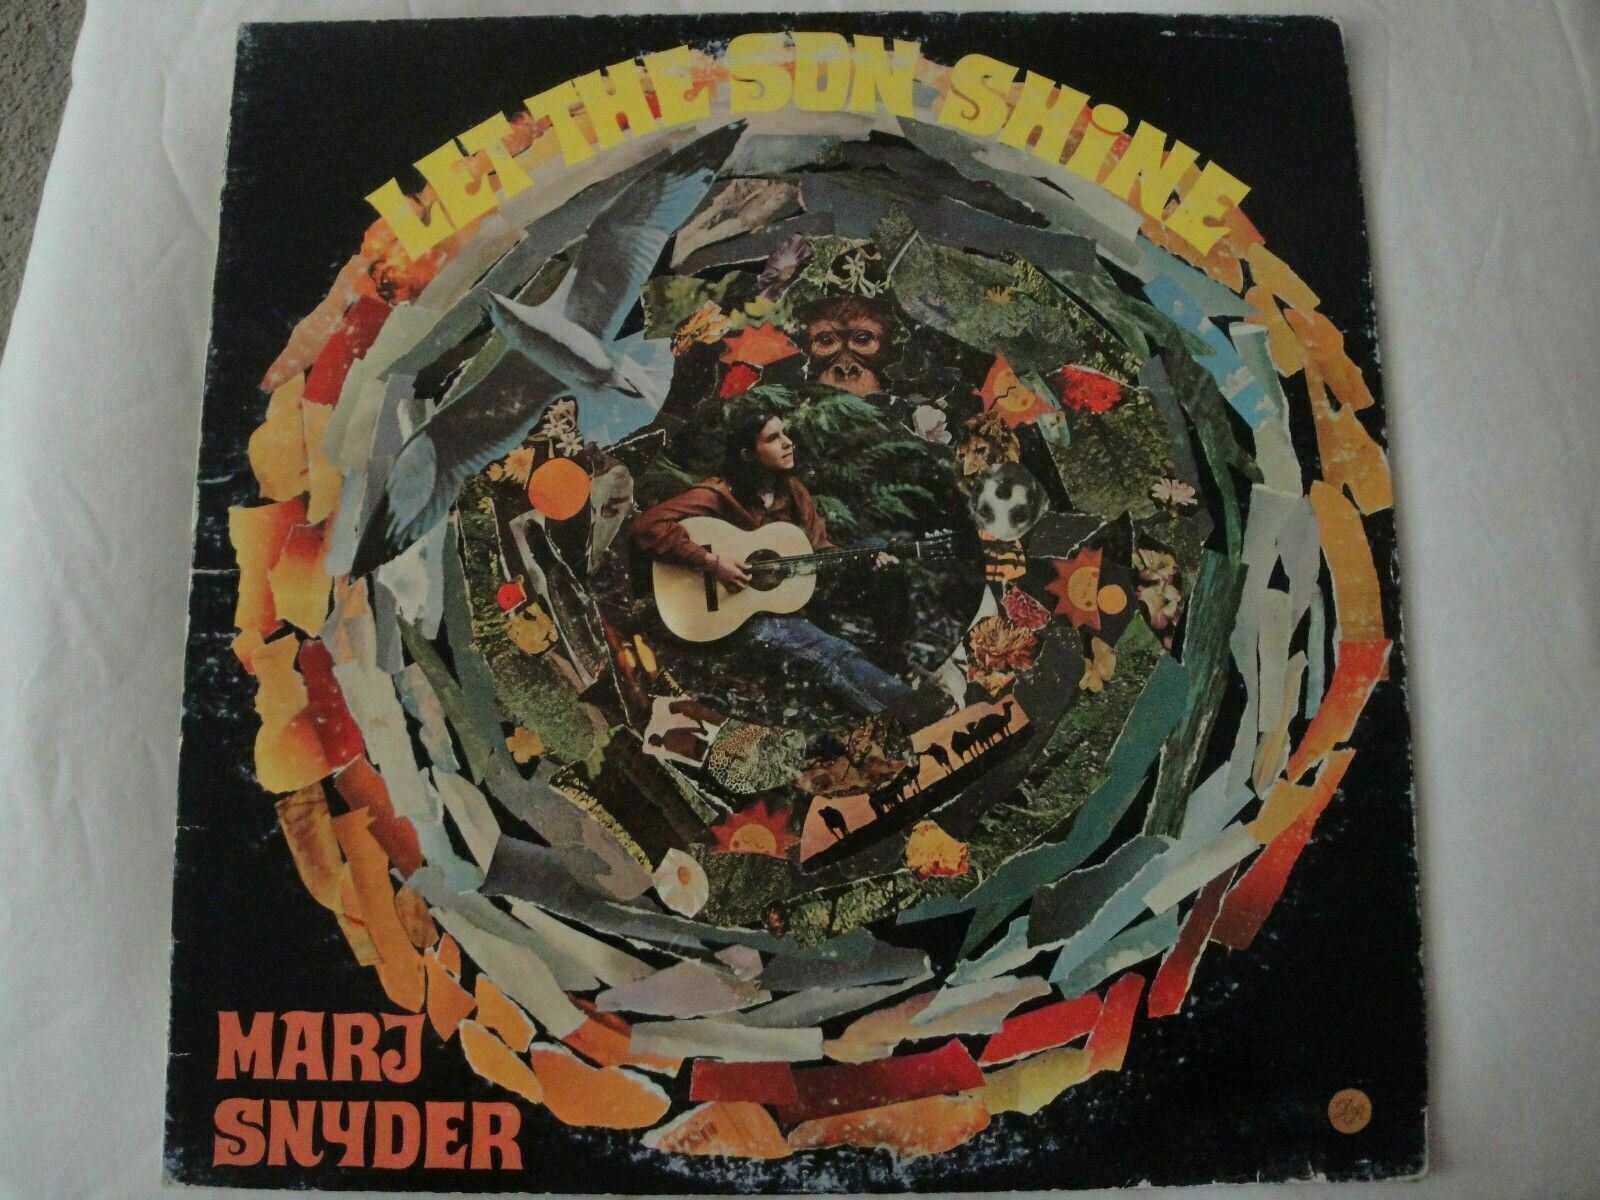 Let The Son Shine by Marj Snyder Very Rare Folk Christian on Discovery Records 